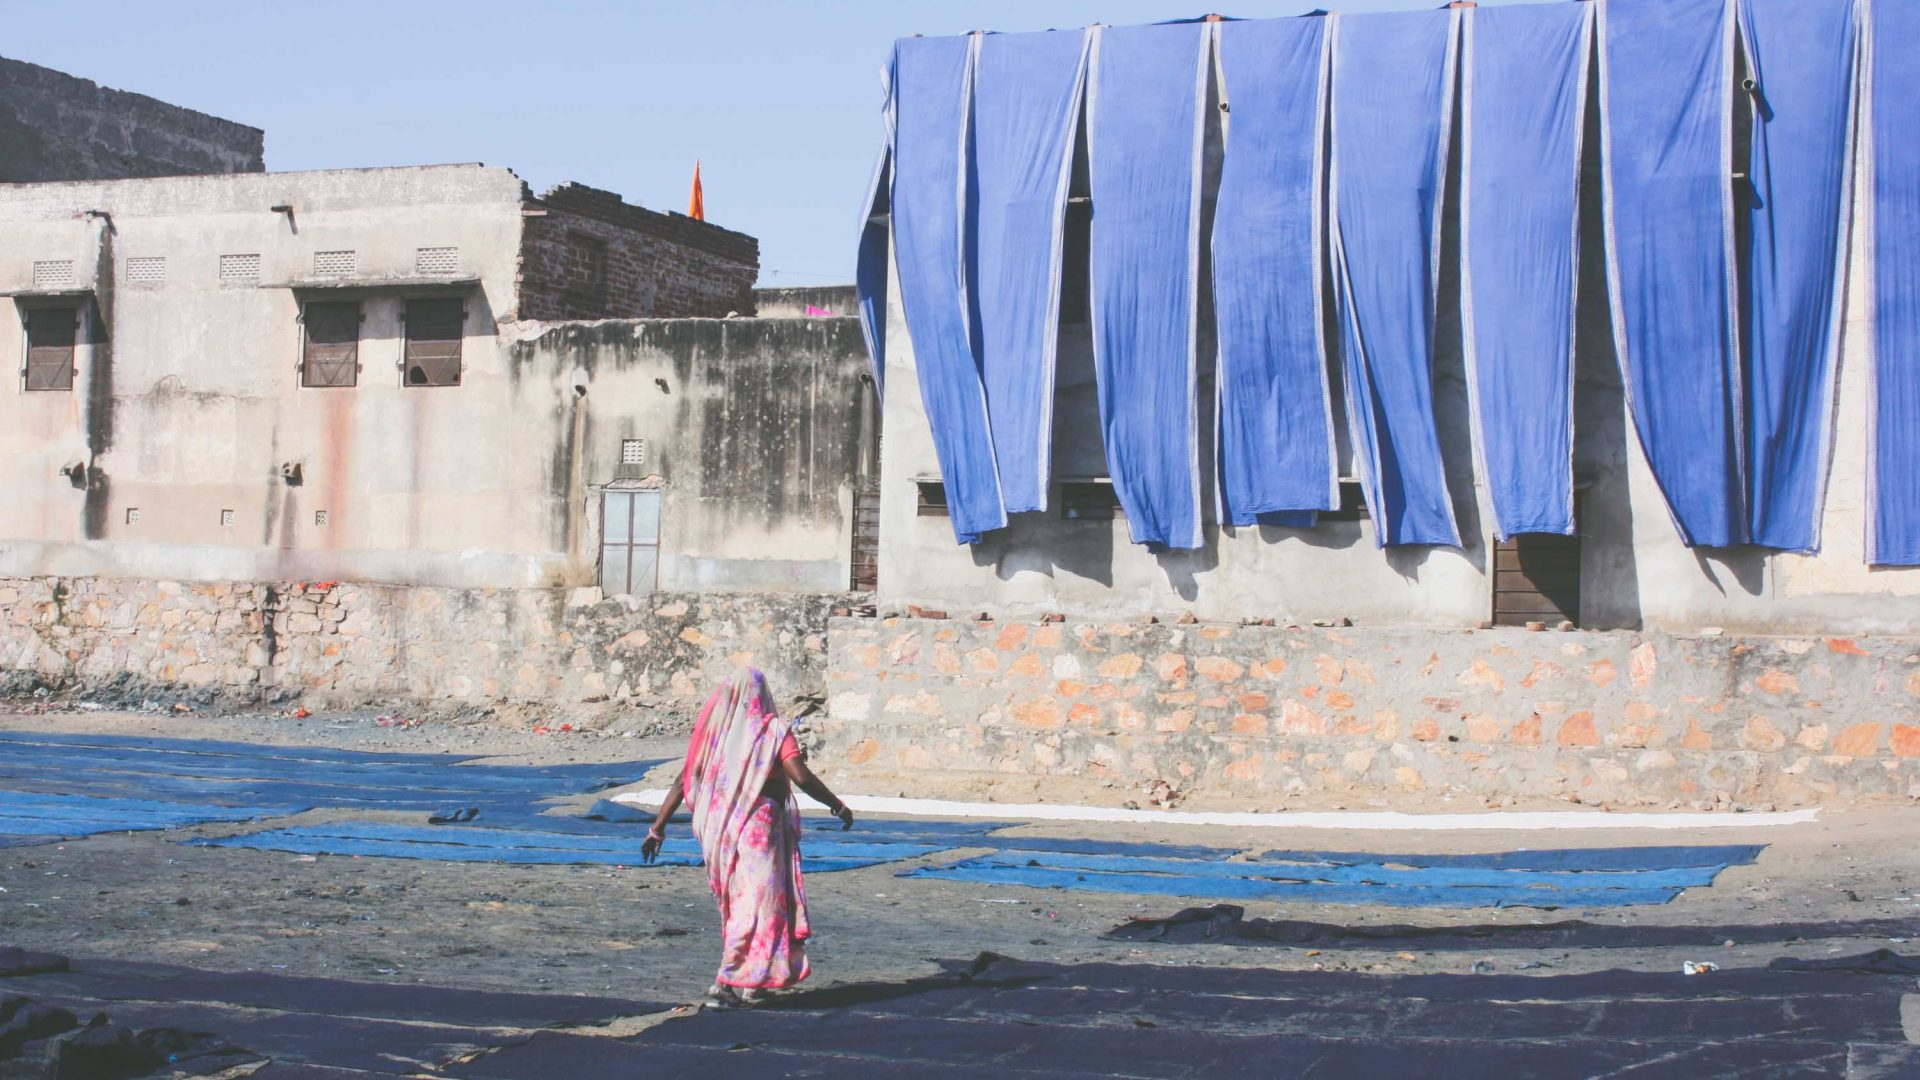 Textiles out to dry in Bagru's drying fields in Rajasthan, India.